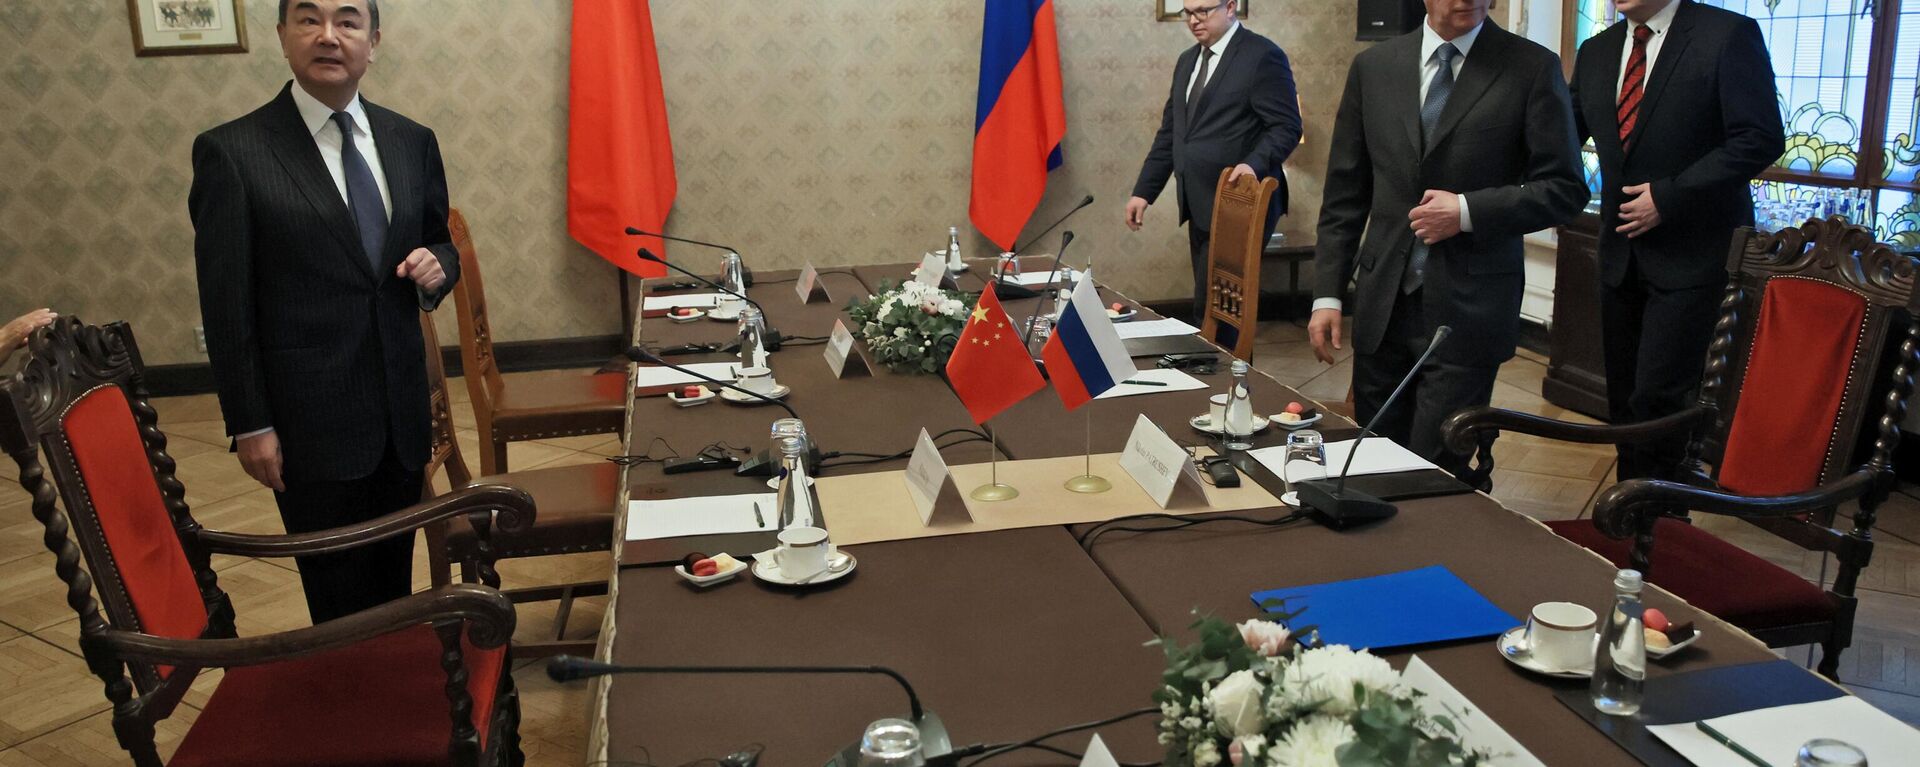 Russian Security Council Secretary Nikolai Patrushev meets with State Counselor Wang Yi of China in Moscow. Tuesday, February 21, 2023. - Sputnik International, 1920, 21.02.2023